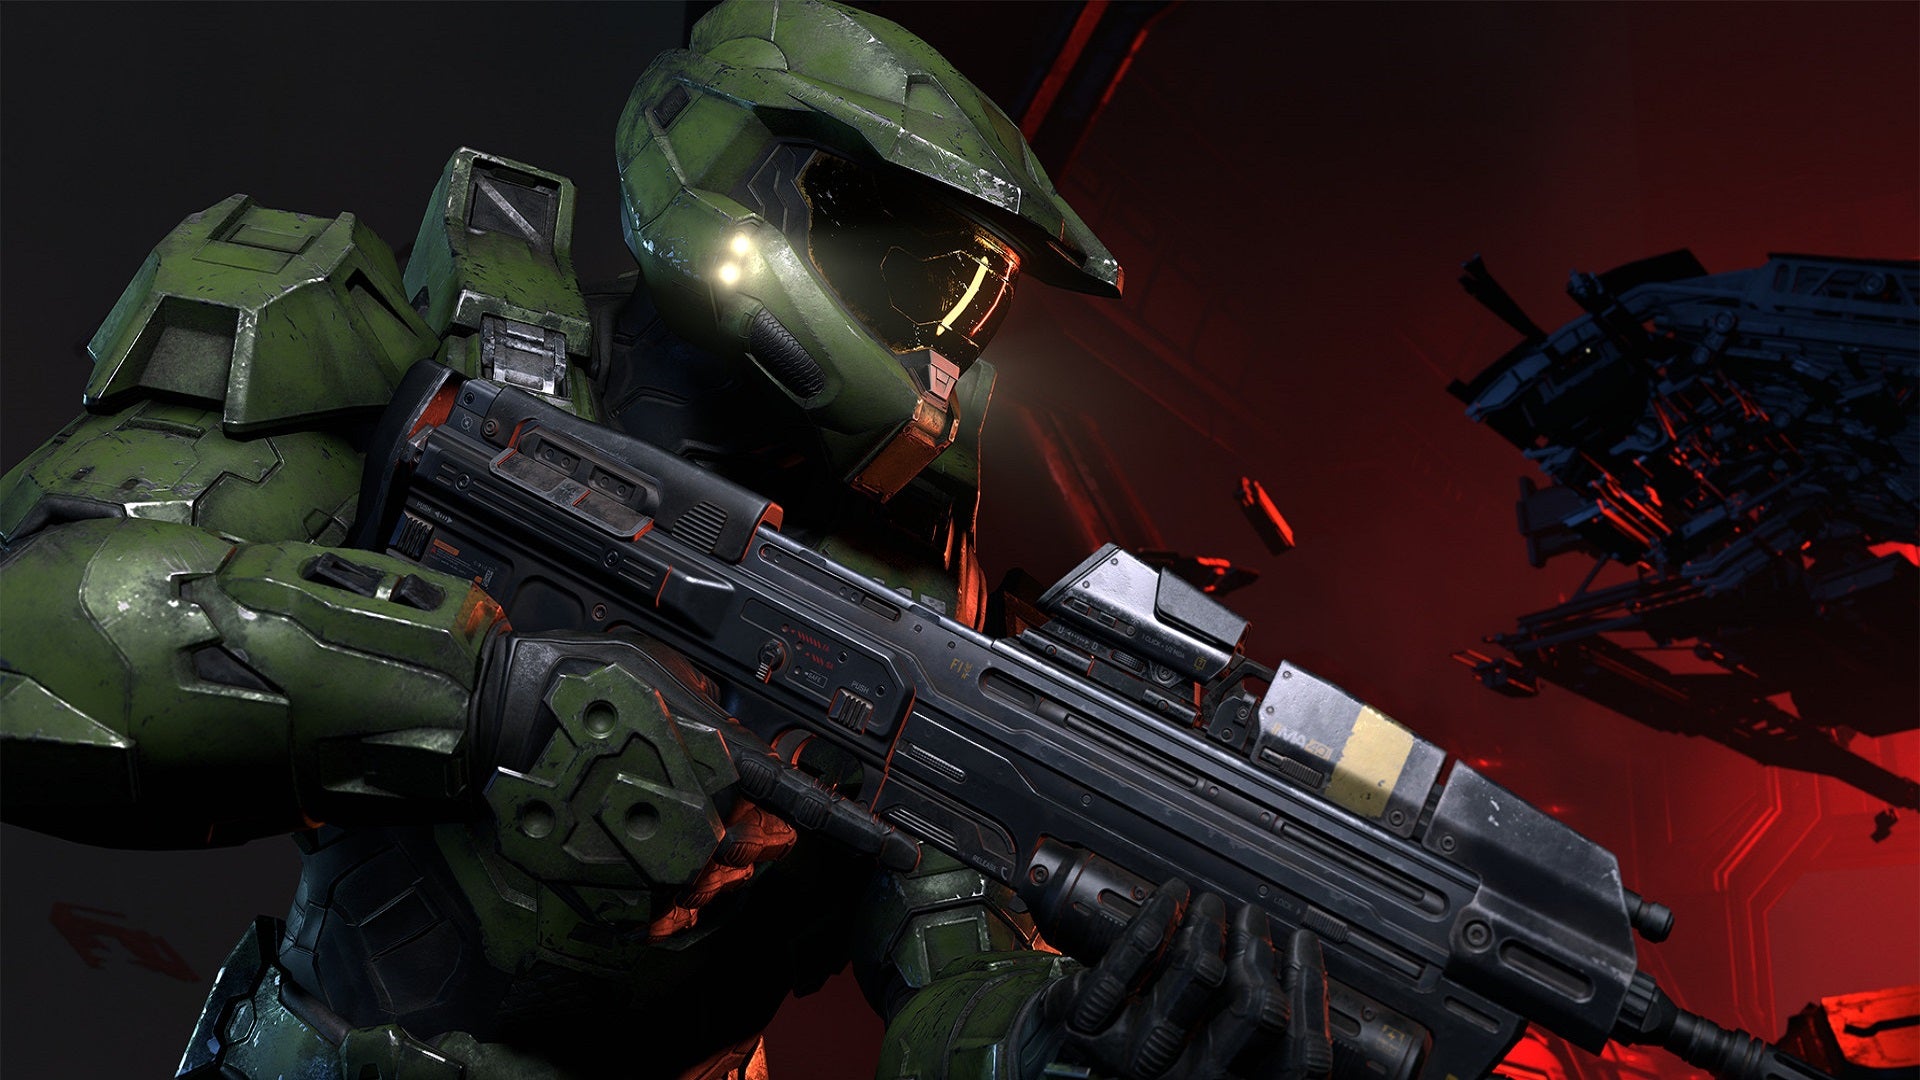 A Spartan in green armor wields the standard MA40 Assault Rifle in a promotional image for Halo Infinite.